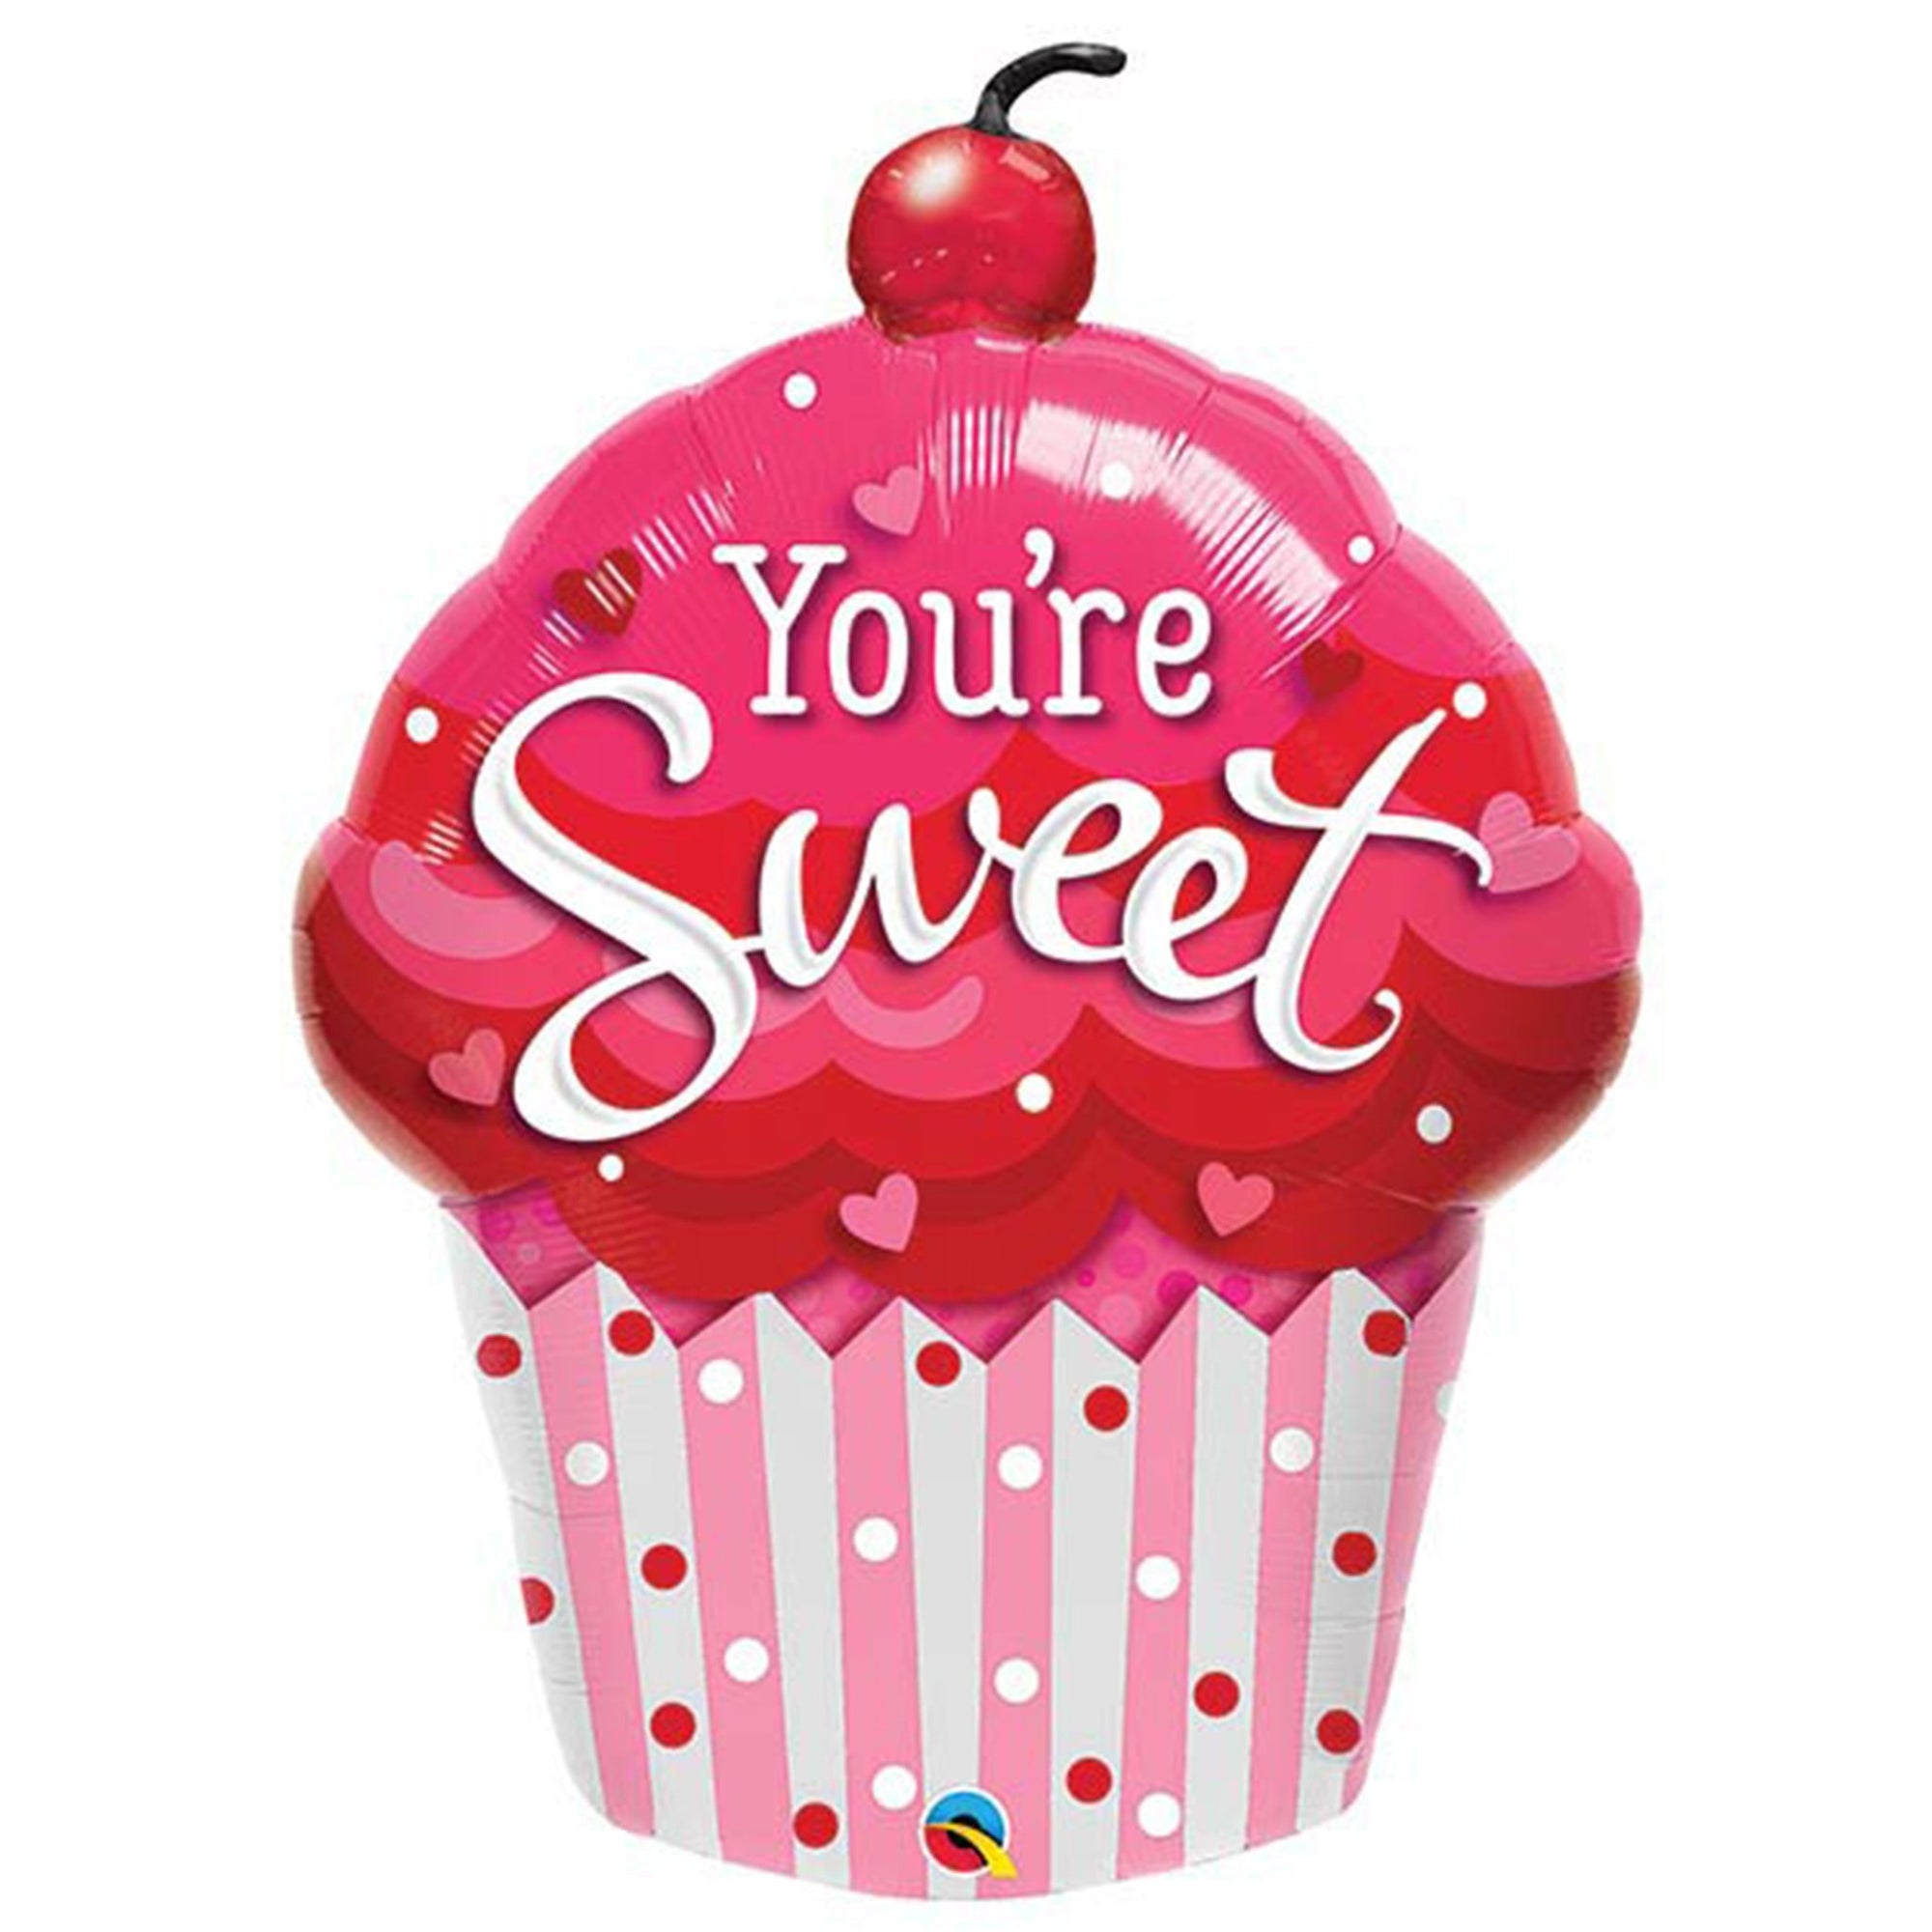 You're Sweet Cupcake Balloon - Pretty Collected